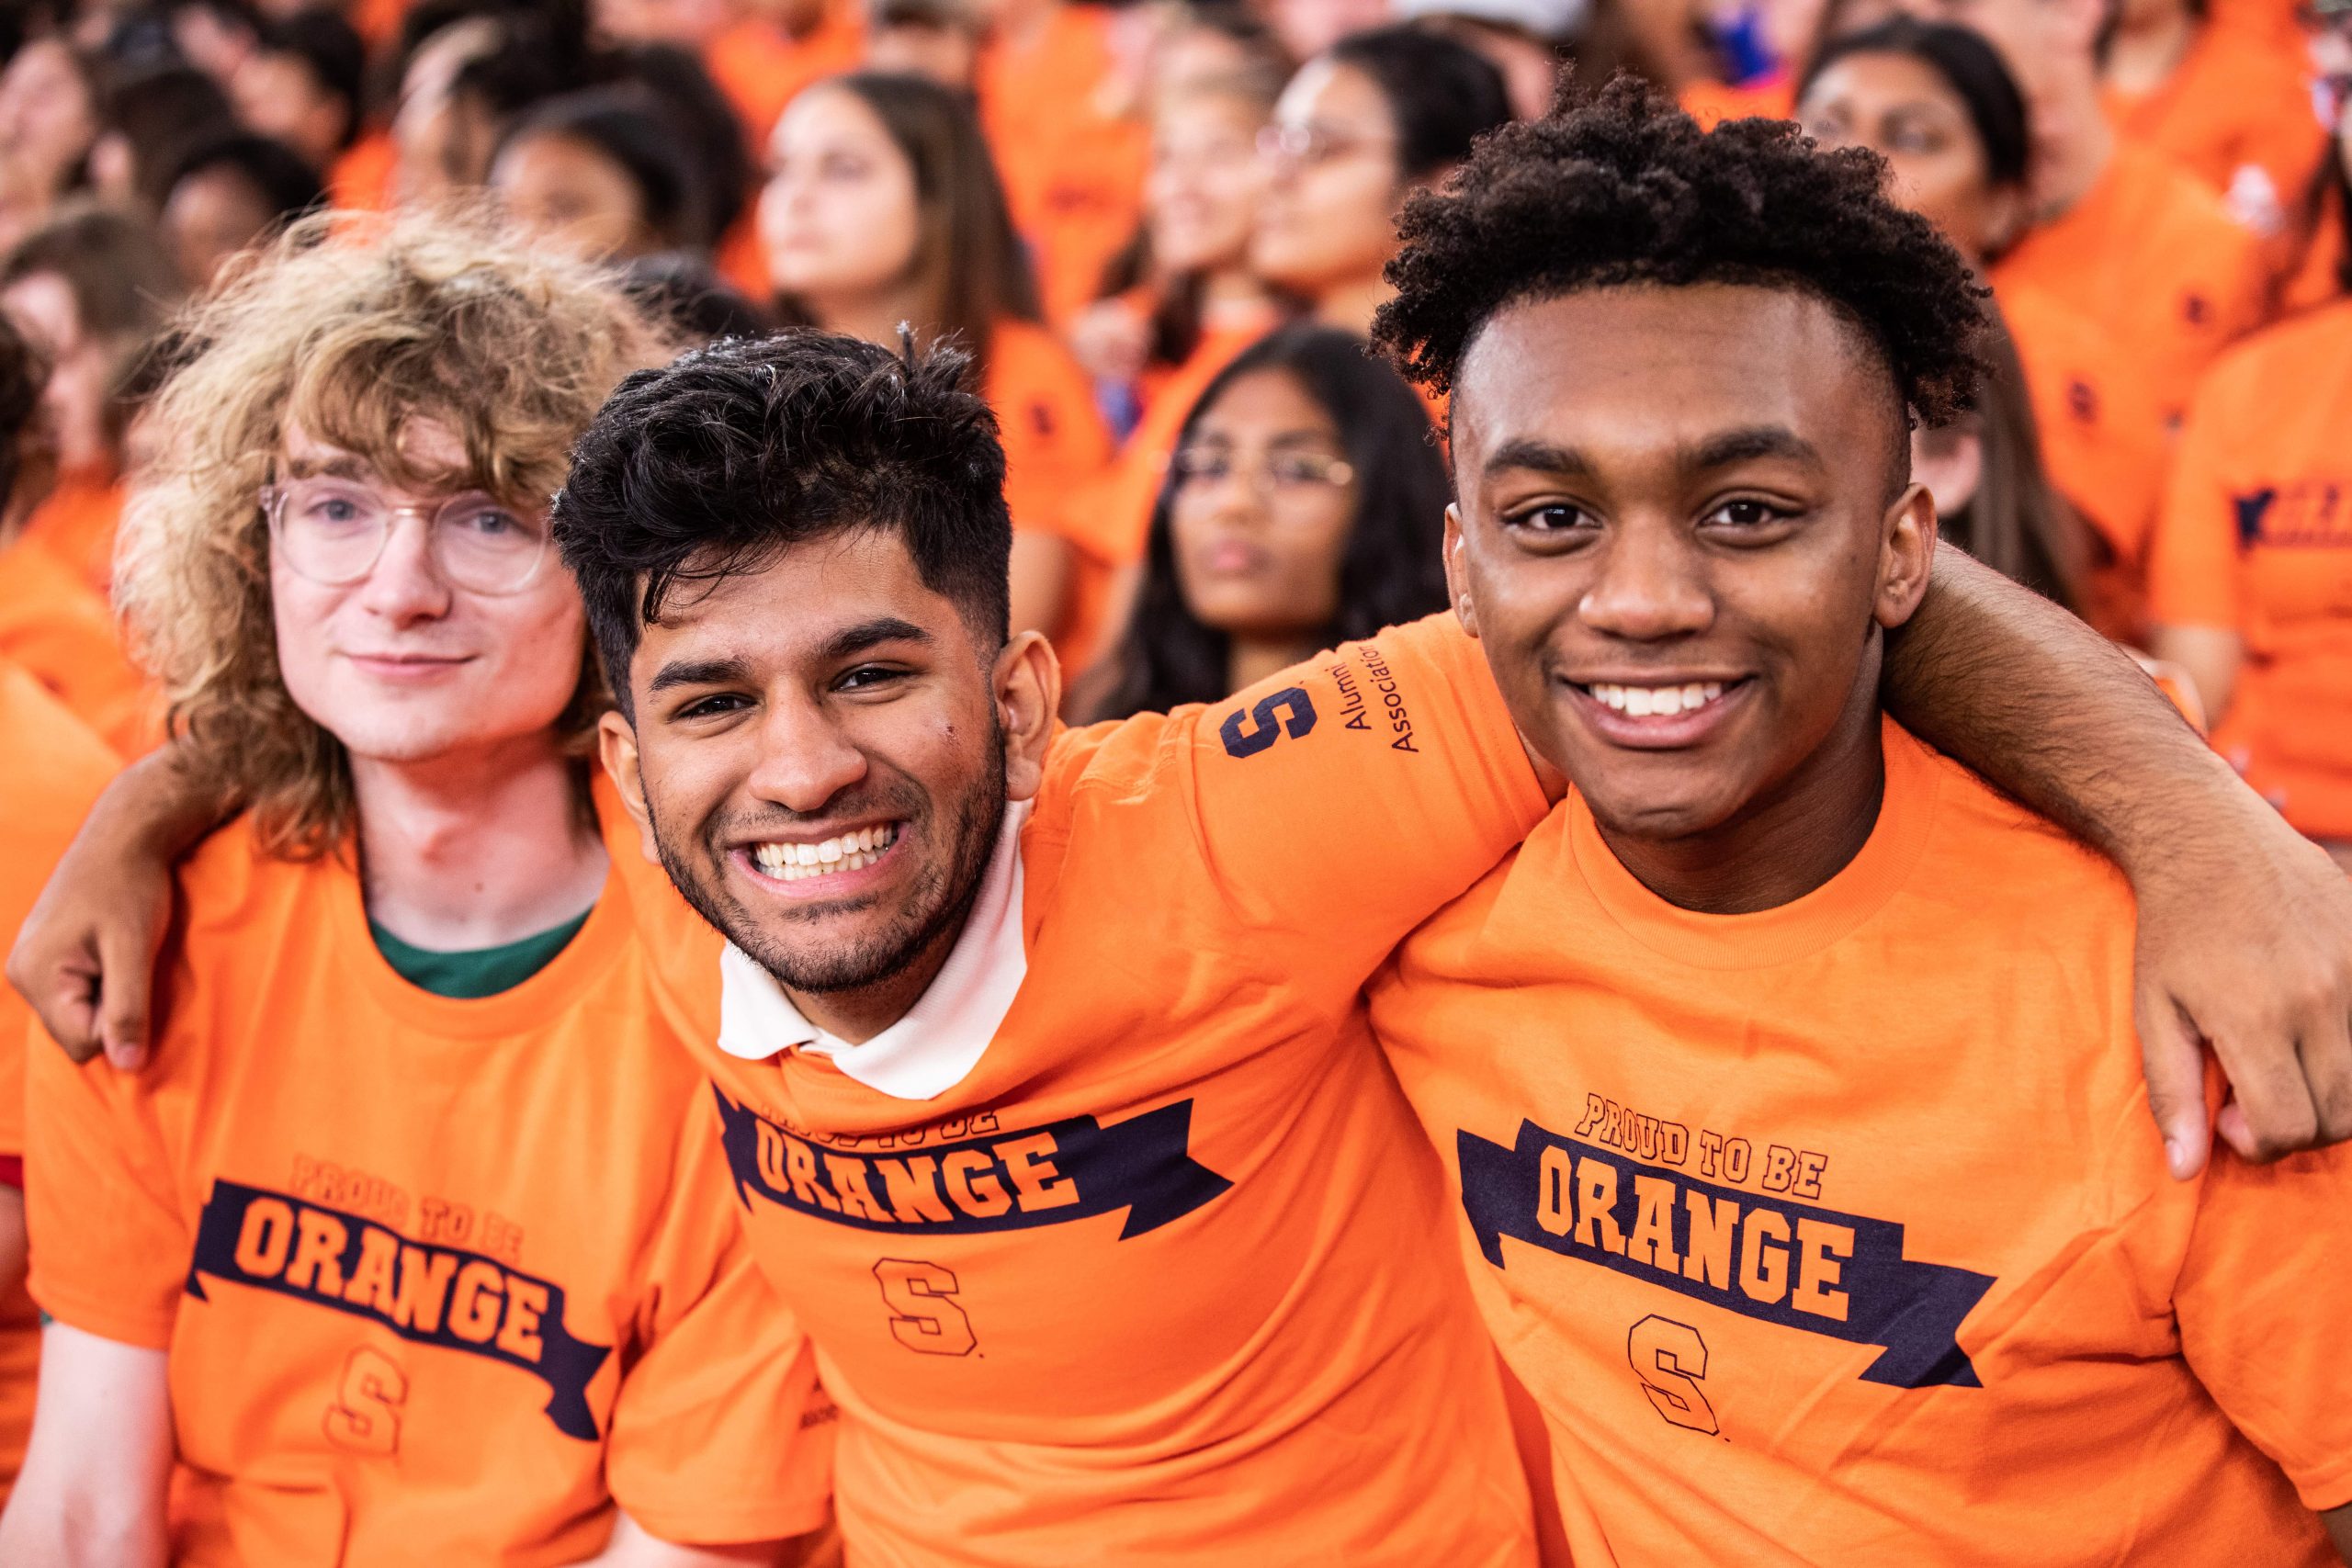 three students wearing Orange t-shirts wrap their arms around each other and smile for a photo during "Dome Sweet Dome"